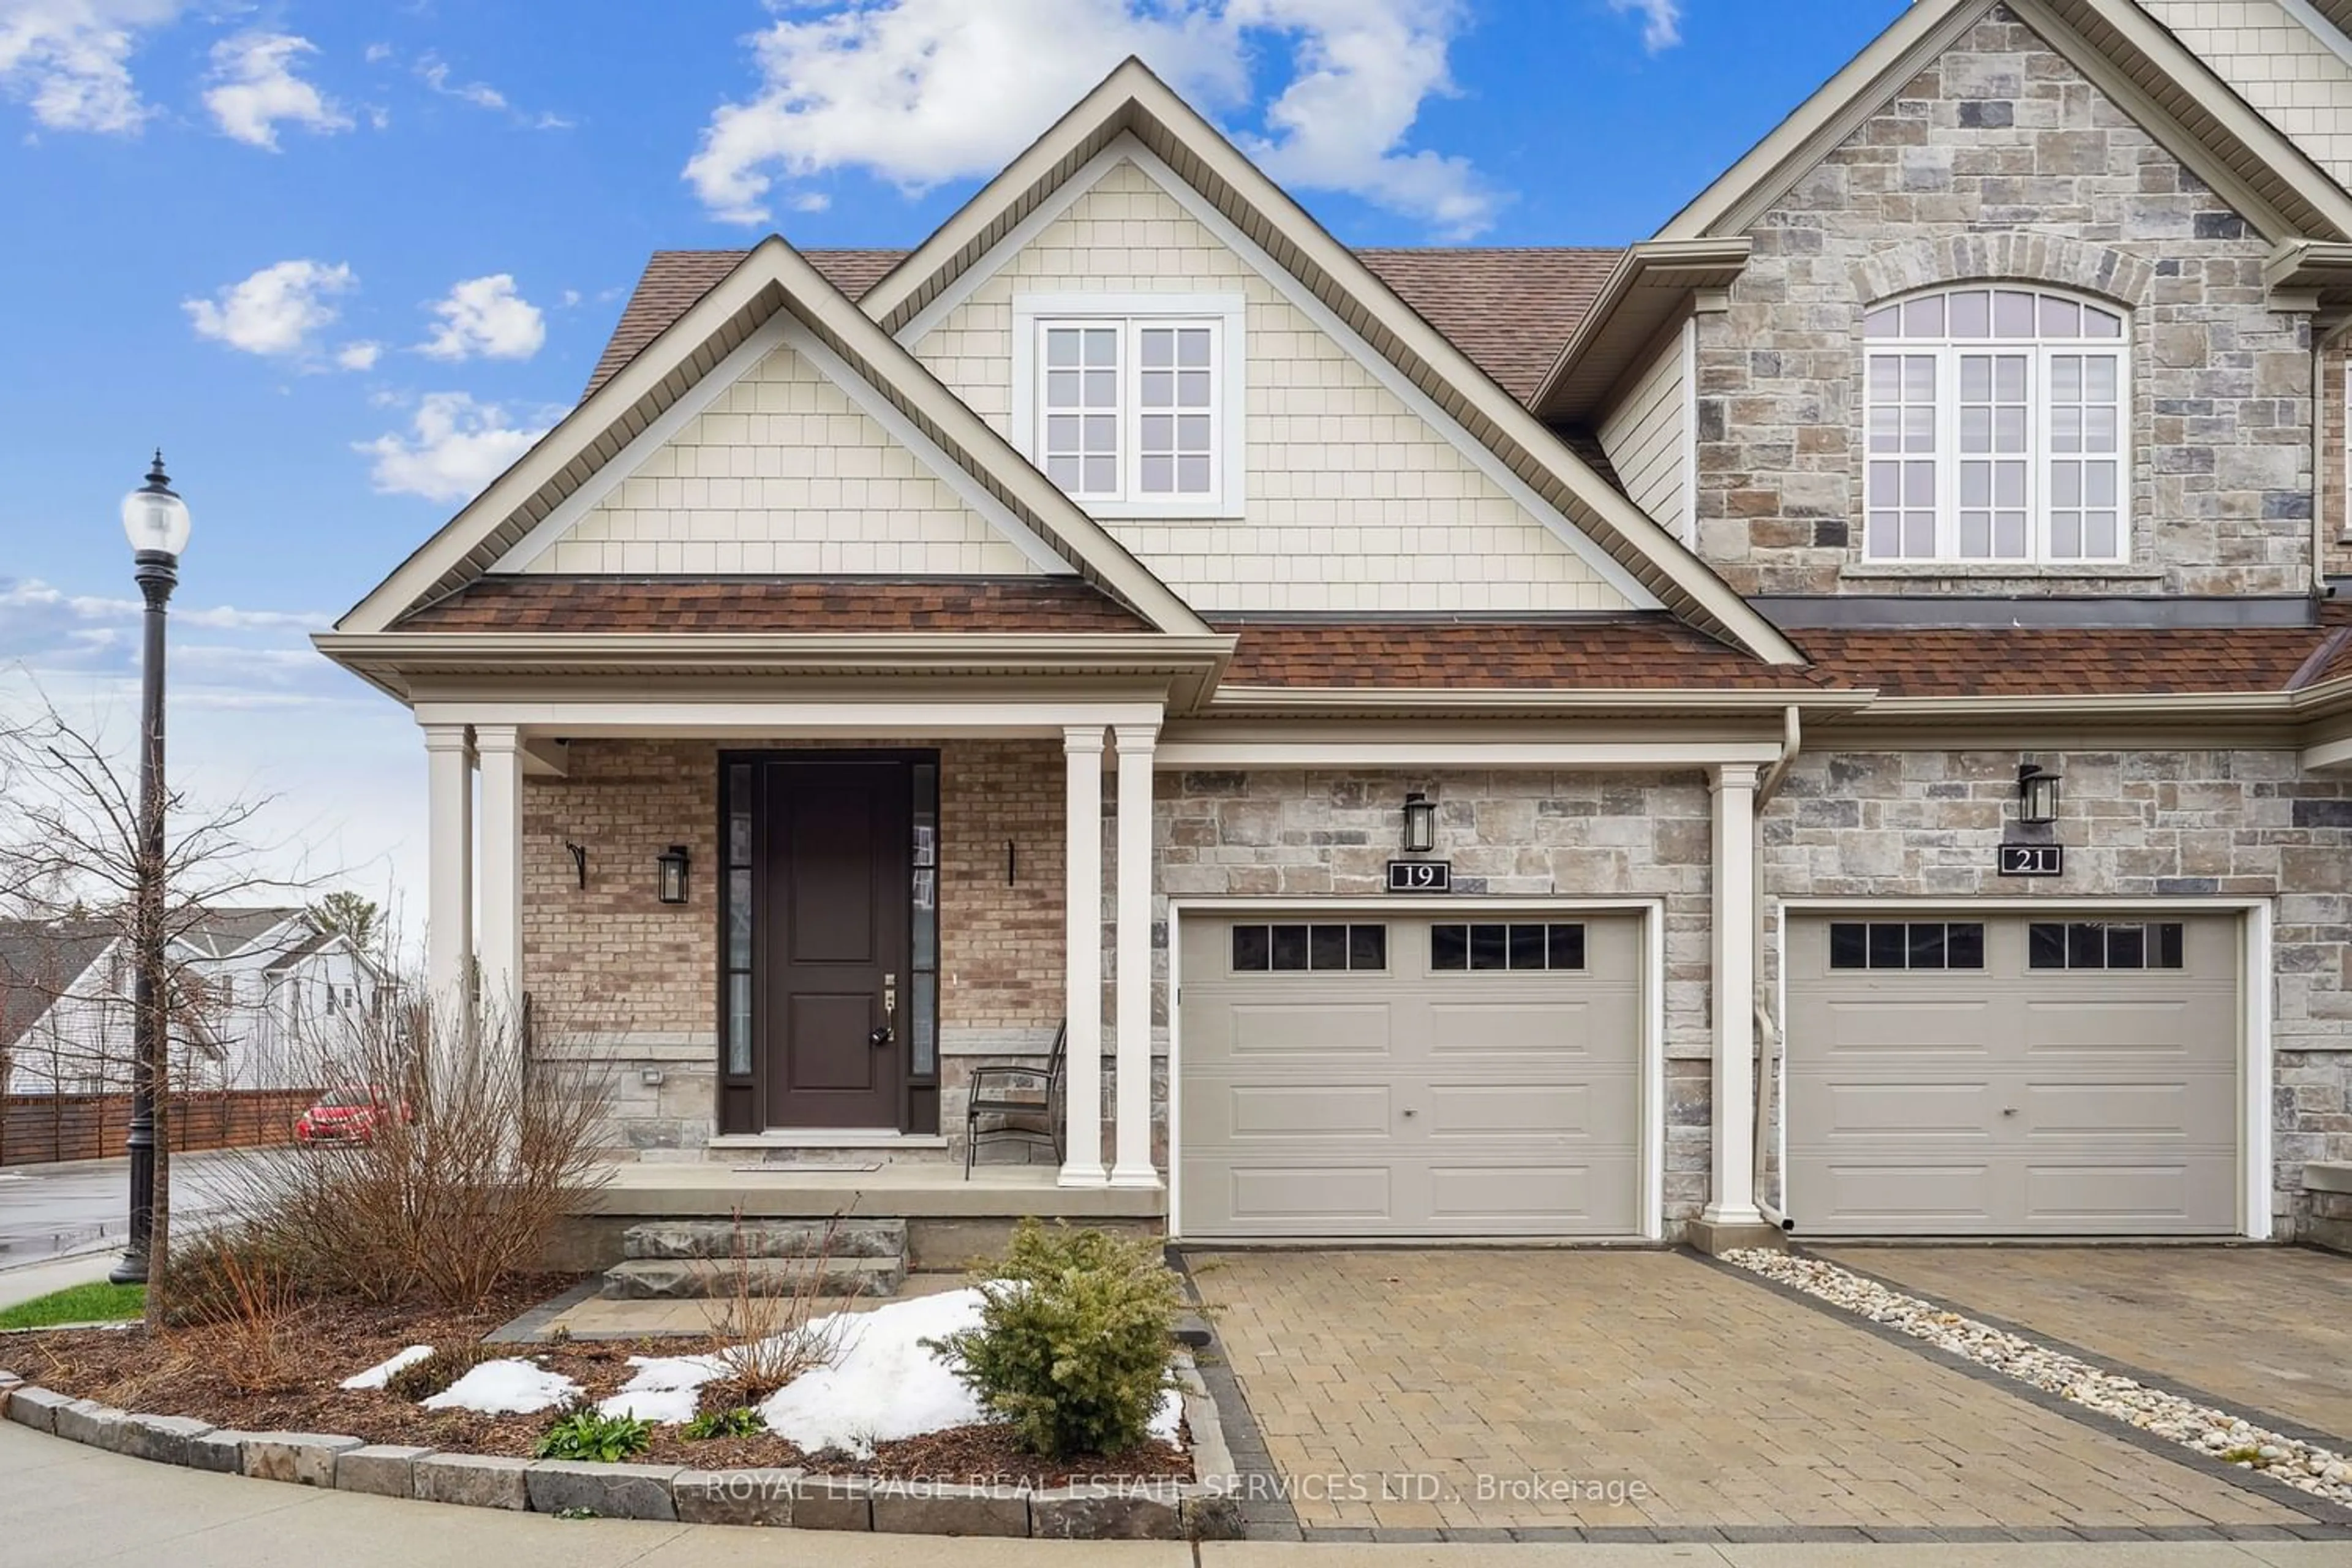 Home with brick exterior material for 19 Windsor Circ, Niagara-on-the-Lake Ontario L0S 1J0